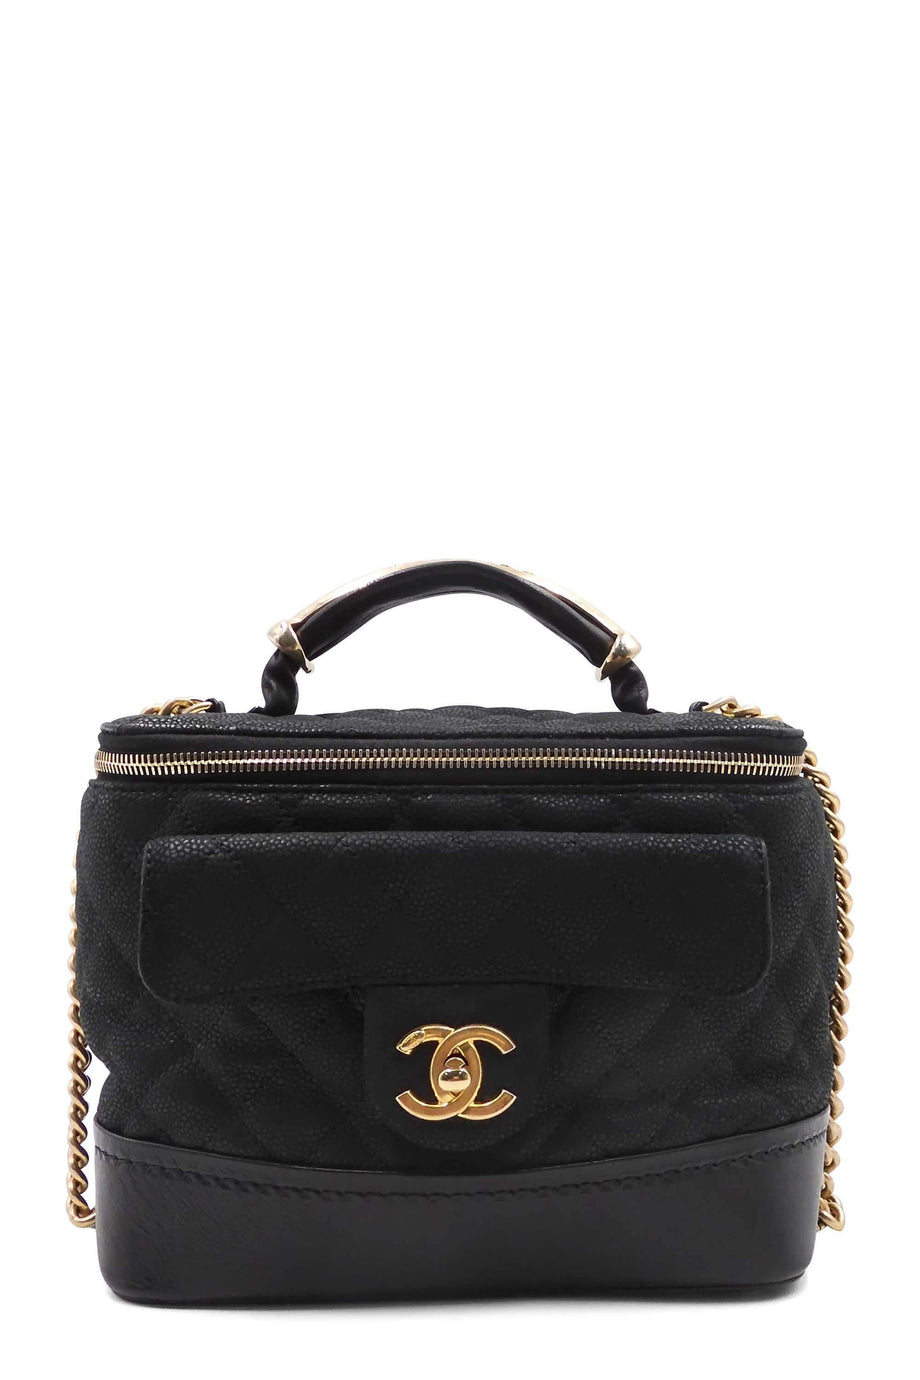 Buy Authentic, Preloved Chanel Globe Trotter Vanity Case Bags from